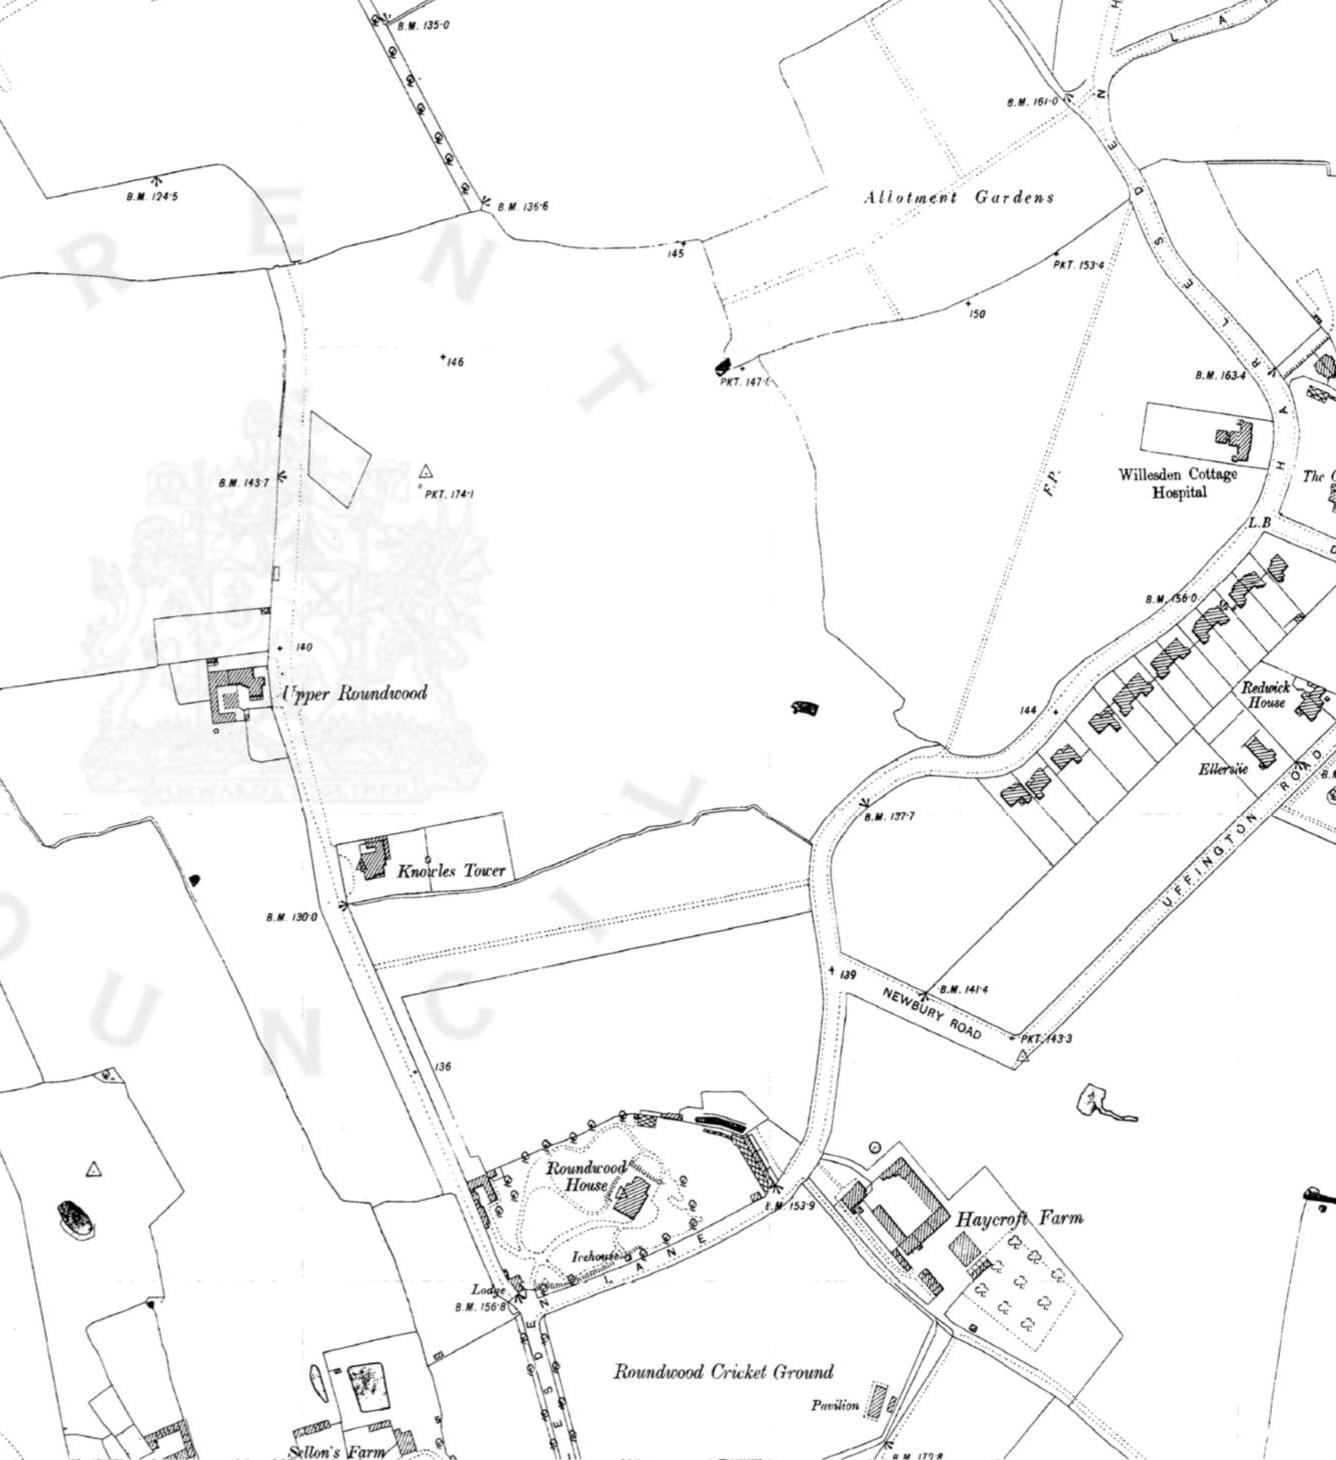 Historic Ordnance Survey Map showing the area of the Roundwood Estate in the 1890s, with Upper Roundwood, Knowles Tower and Roundwood House marked, as well as Haycroft Farm and Roundwood Cricket Ground